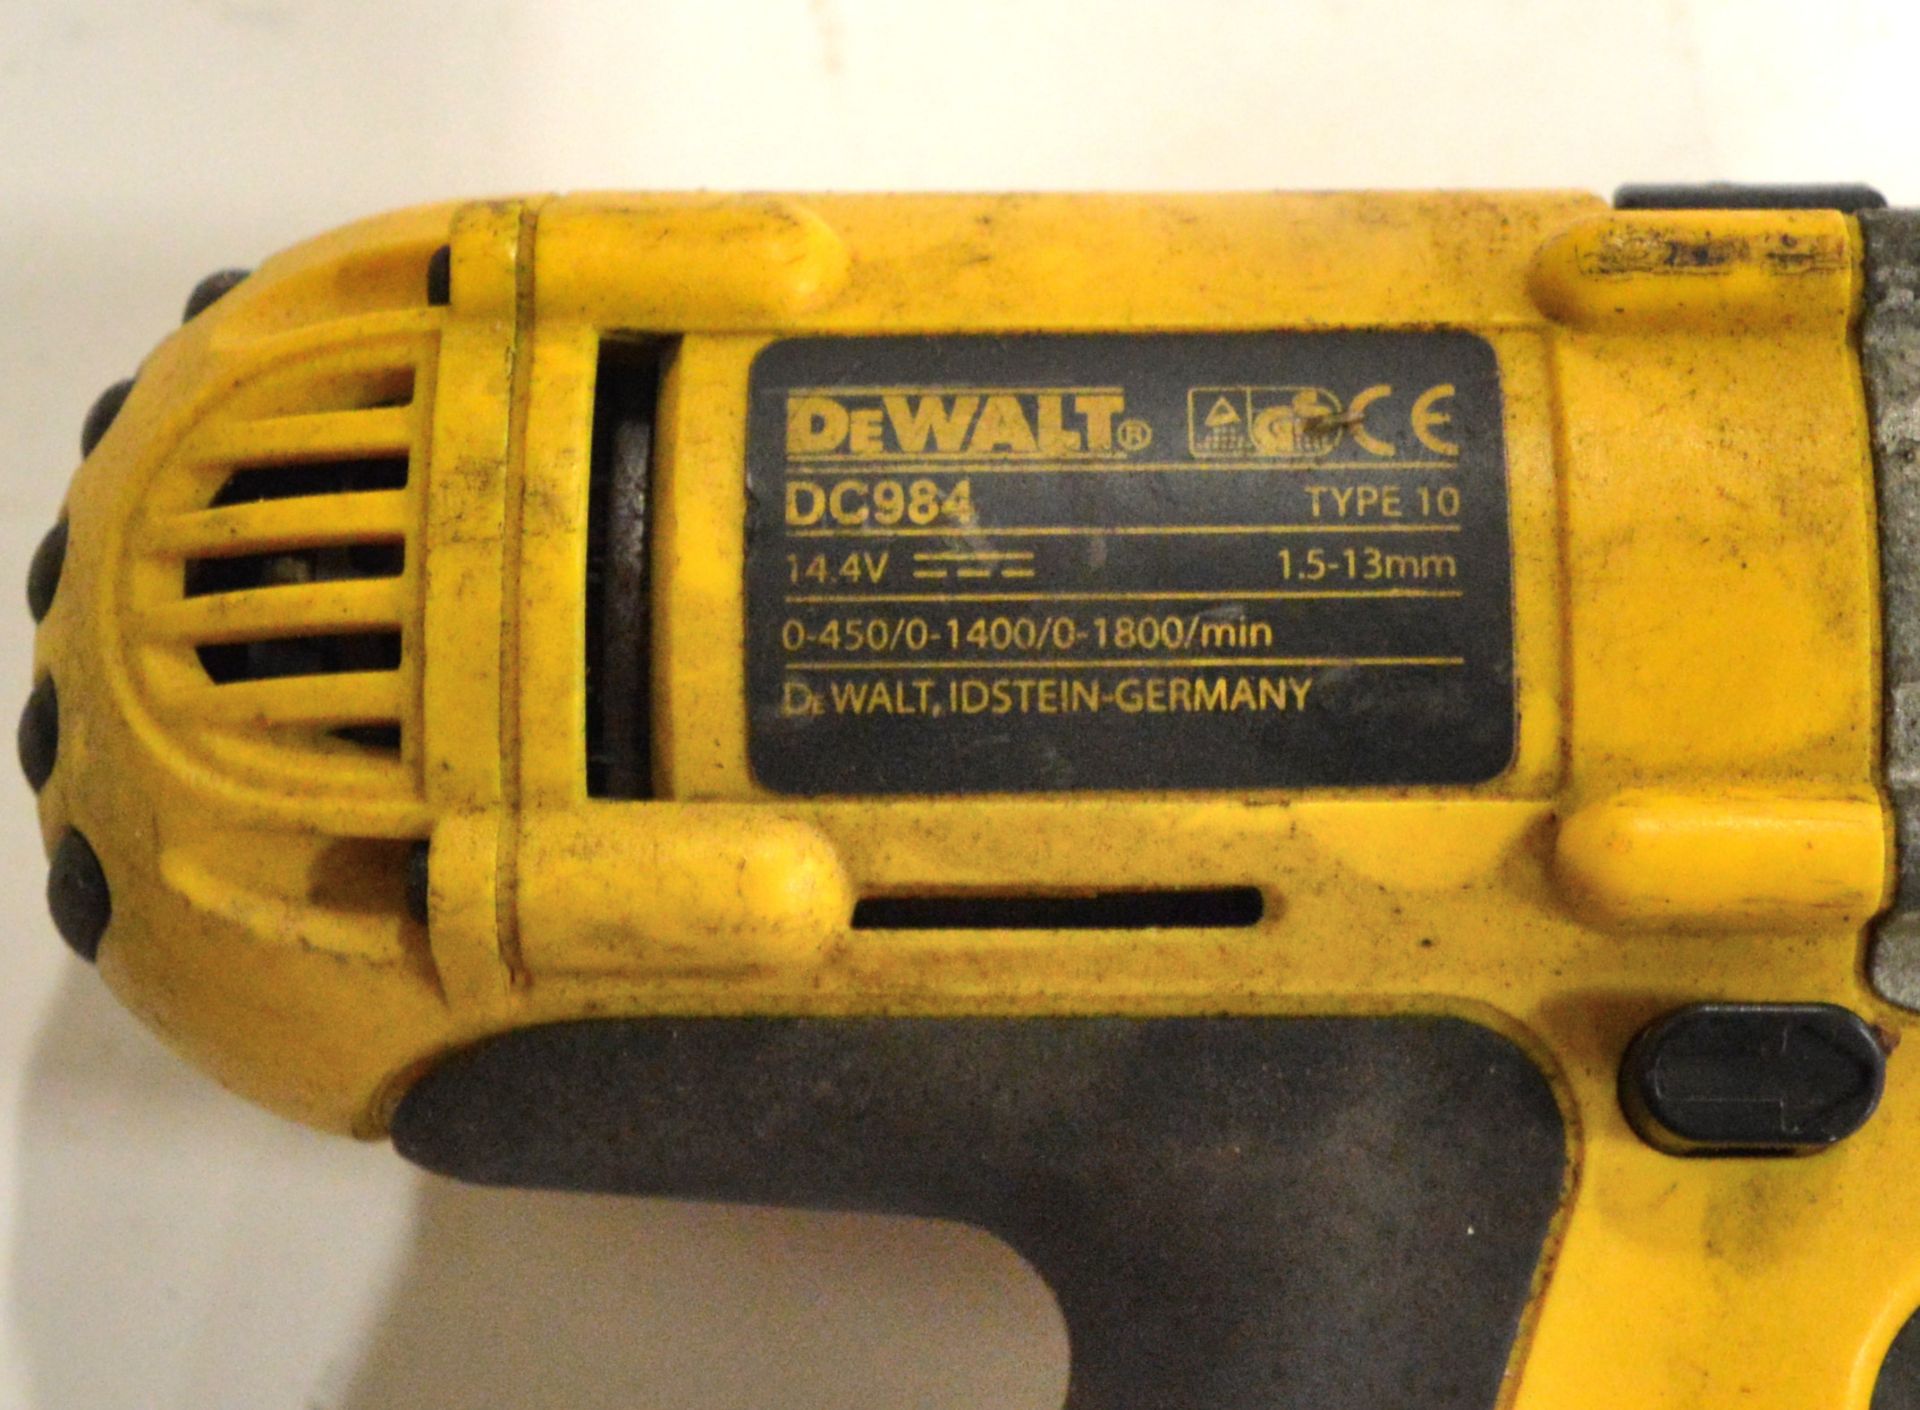 DeWalt DC984 Battery Drill - Body only. - Image 2 of 2